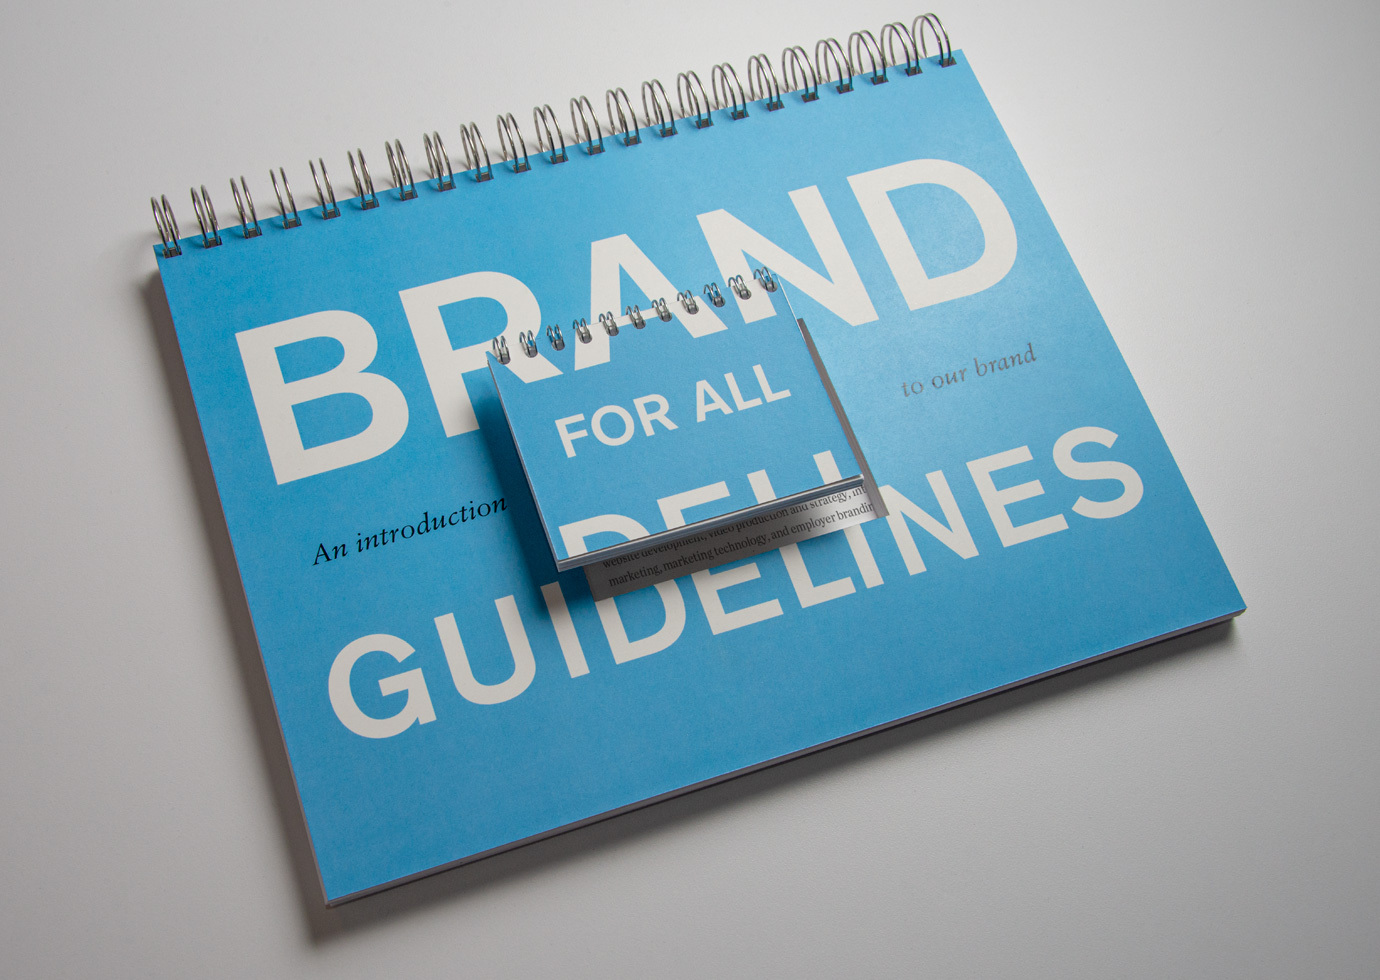 A large blue bound brand book with an identical tiny book perched on top of it with the title text, Brand for all guidelines.